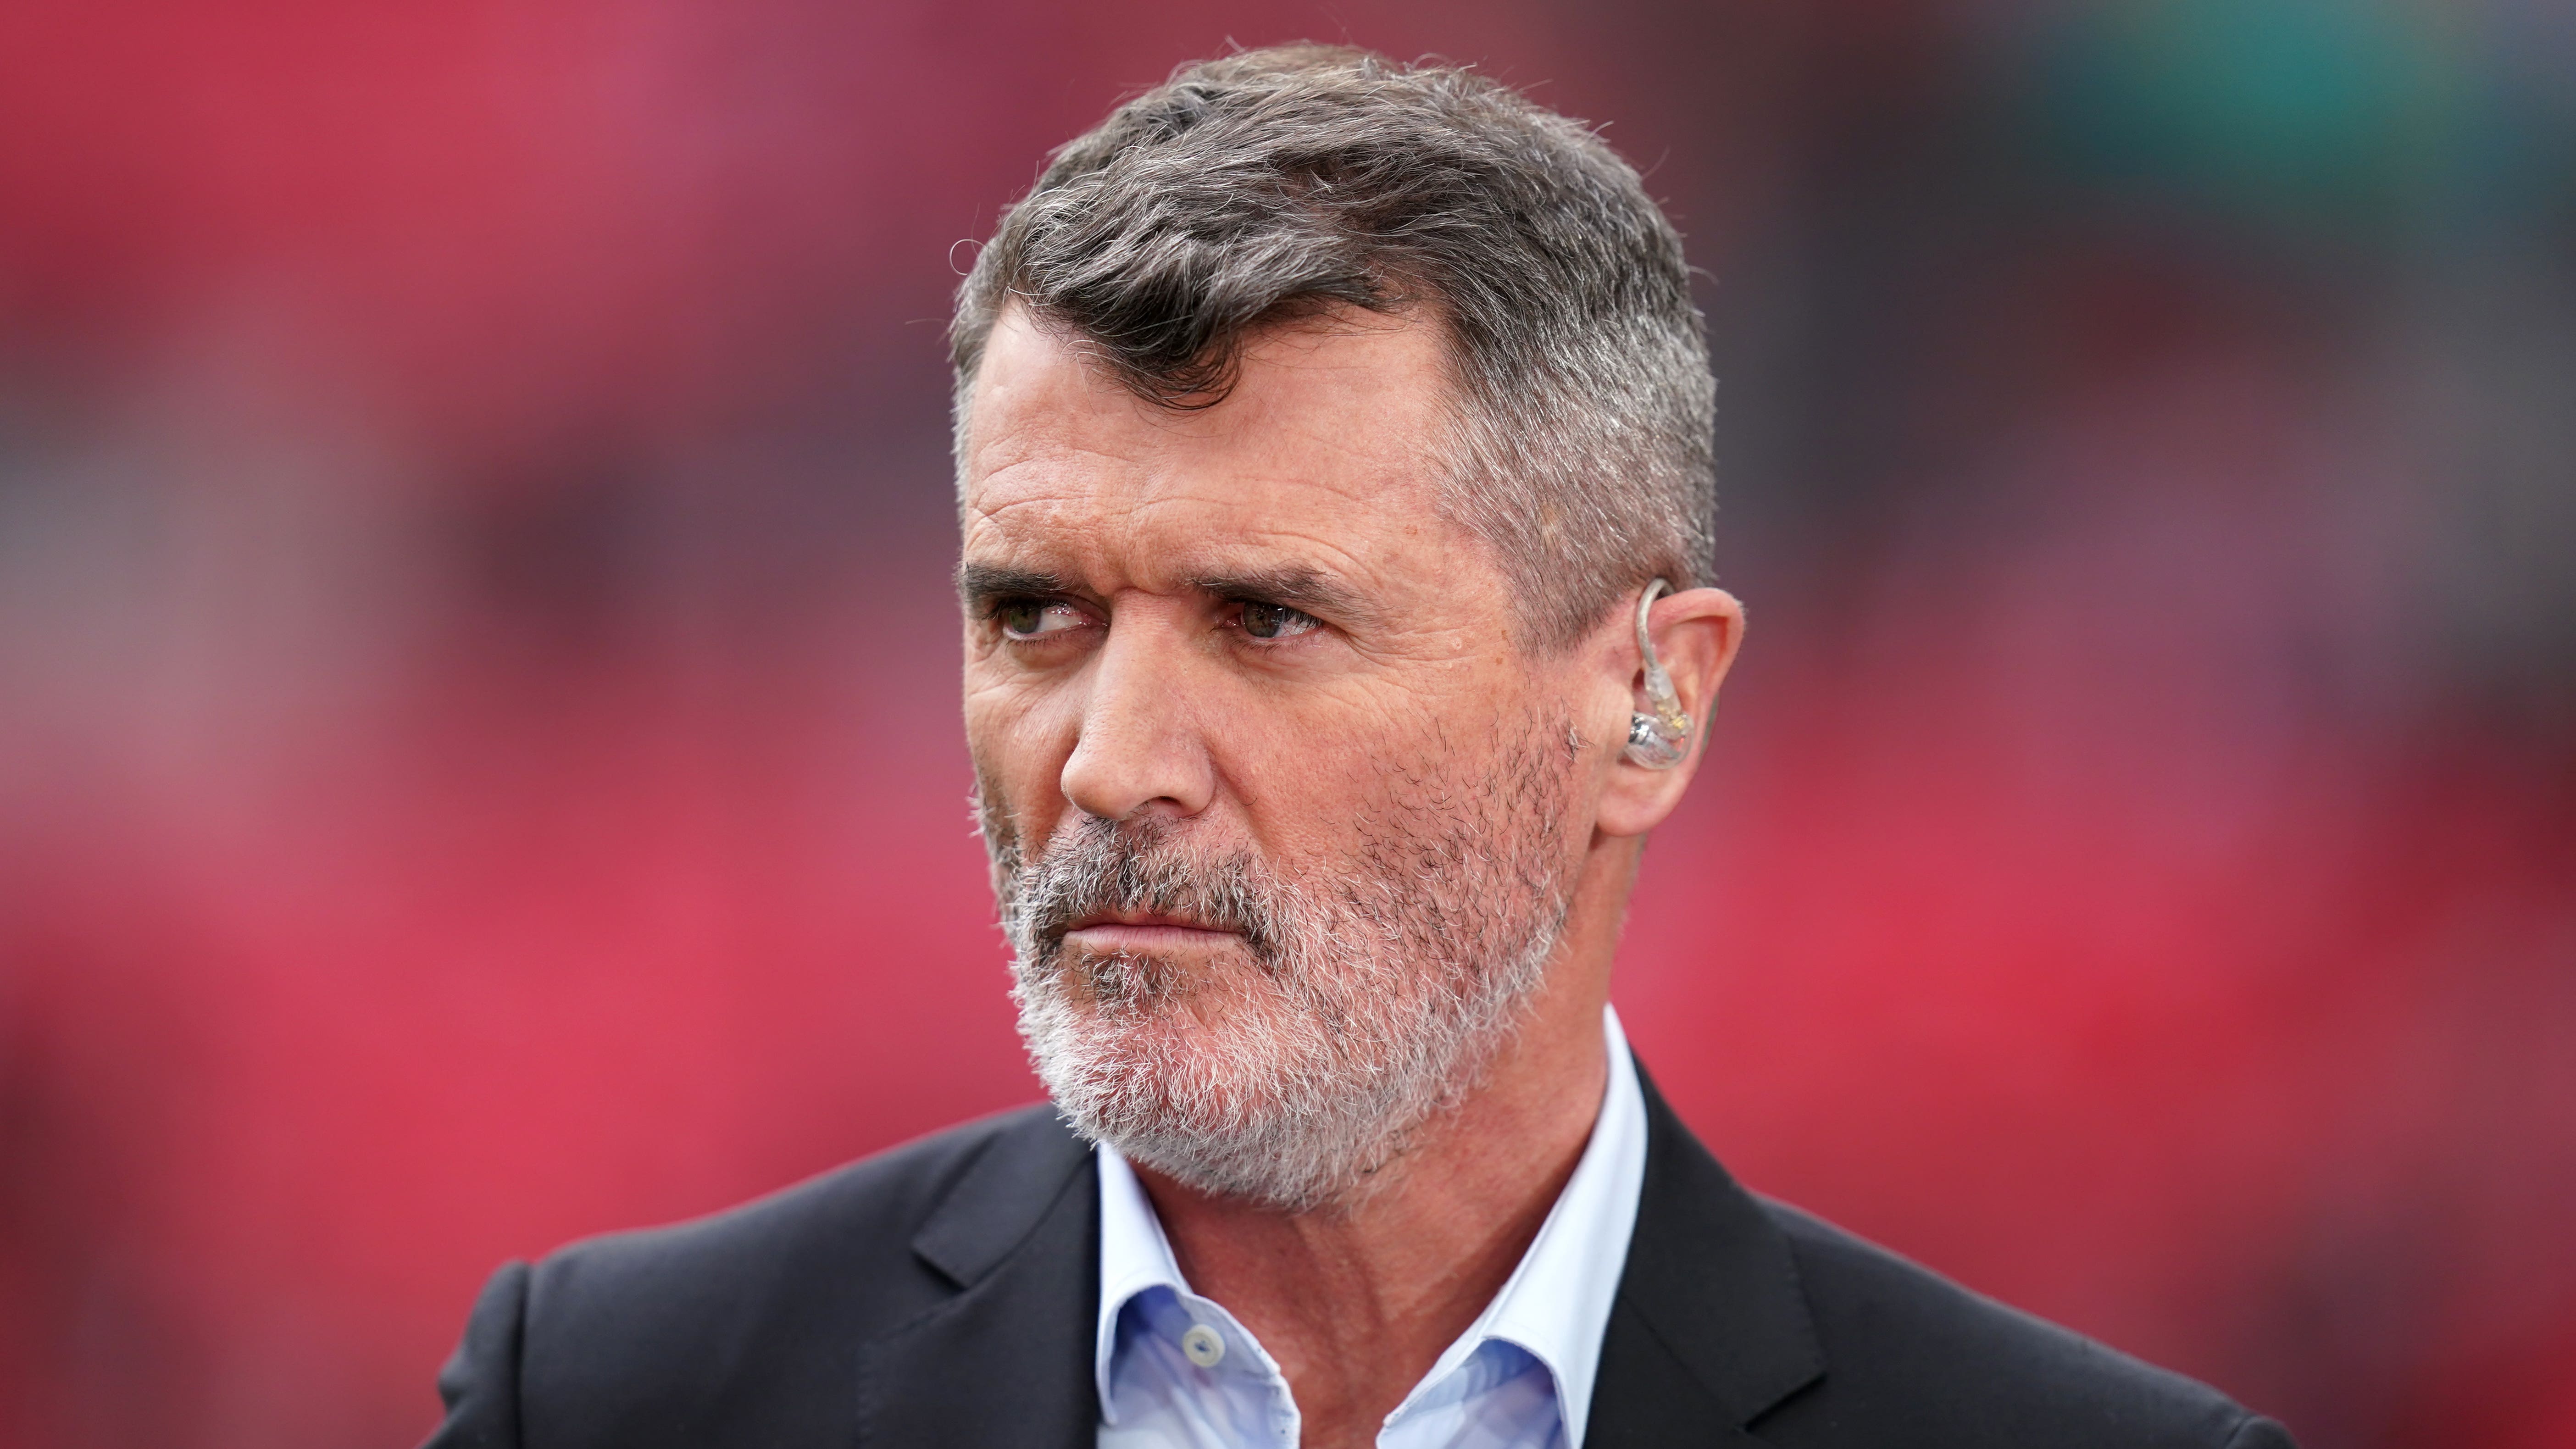 Roy Keane hints at interest in Republic of Ireland role